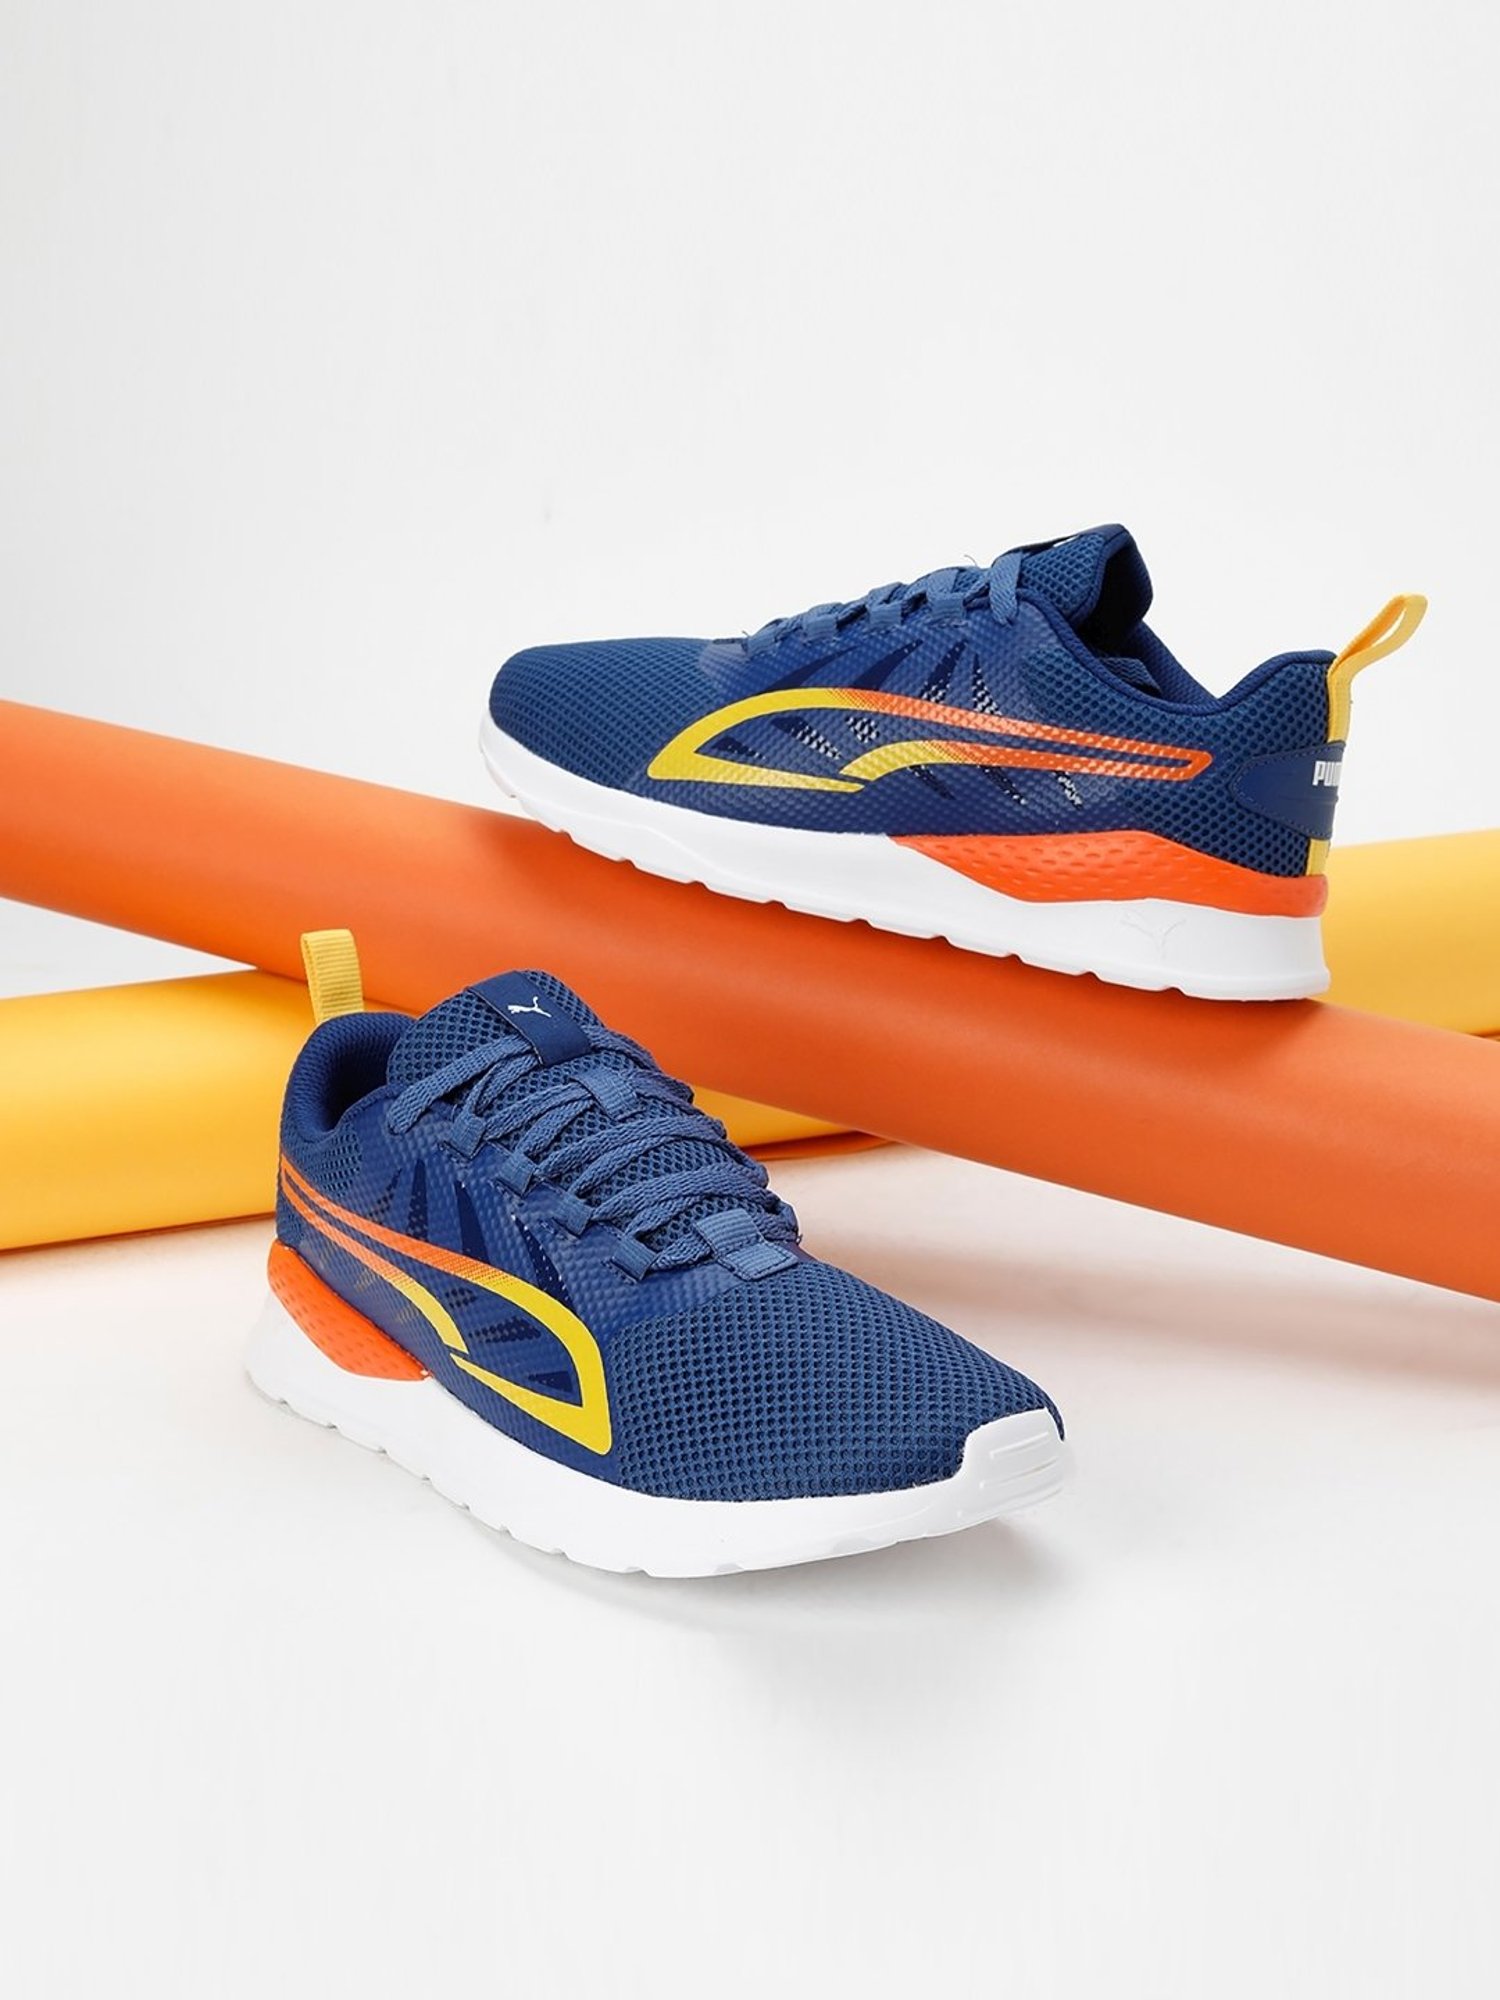 Puma BLUE SNEAKERS ::PARMAR BOOT HOUSE | Buy Footwear and Accessories For  Men, Women & Kids